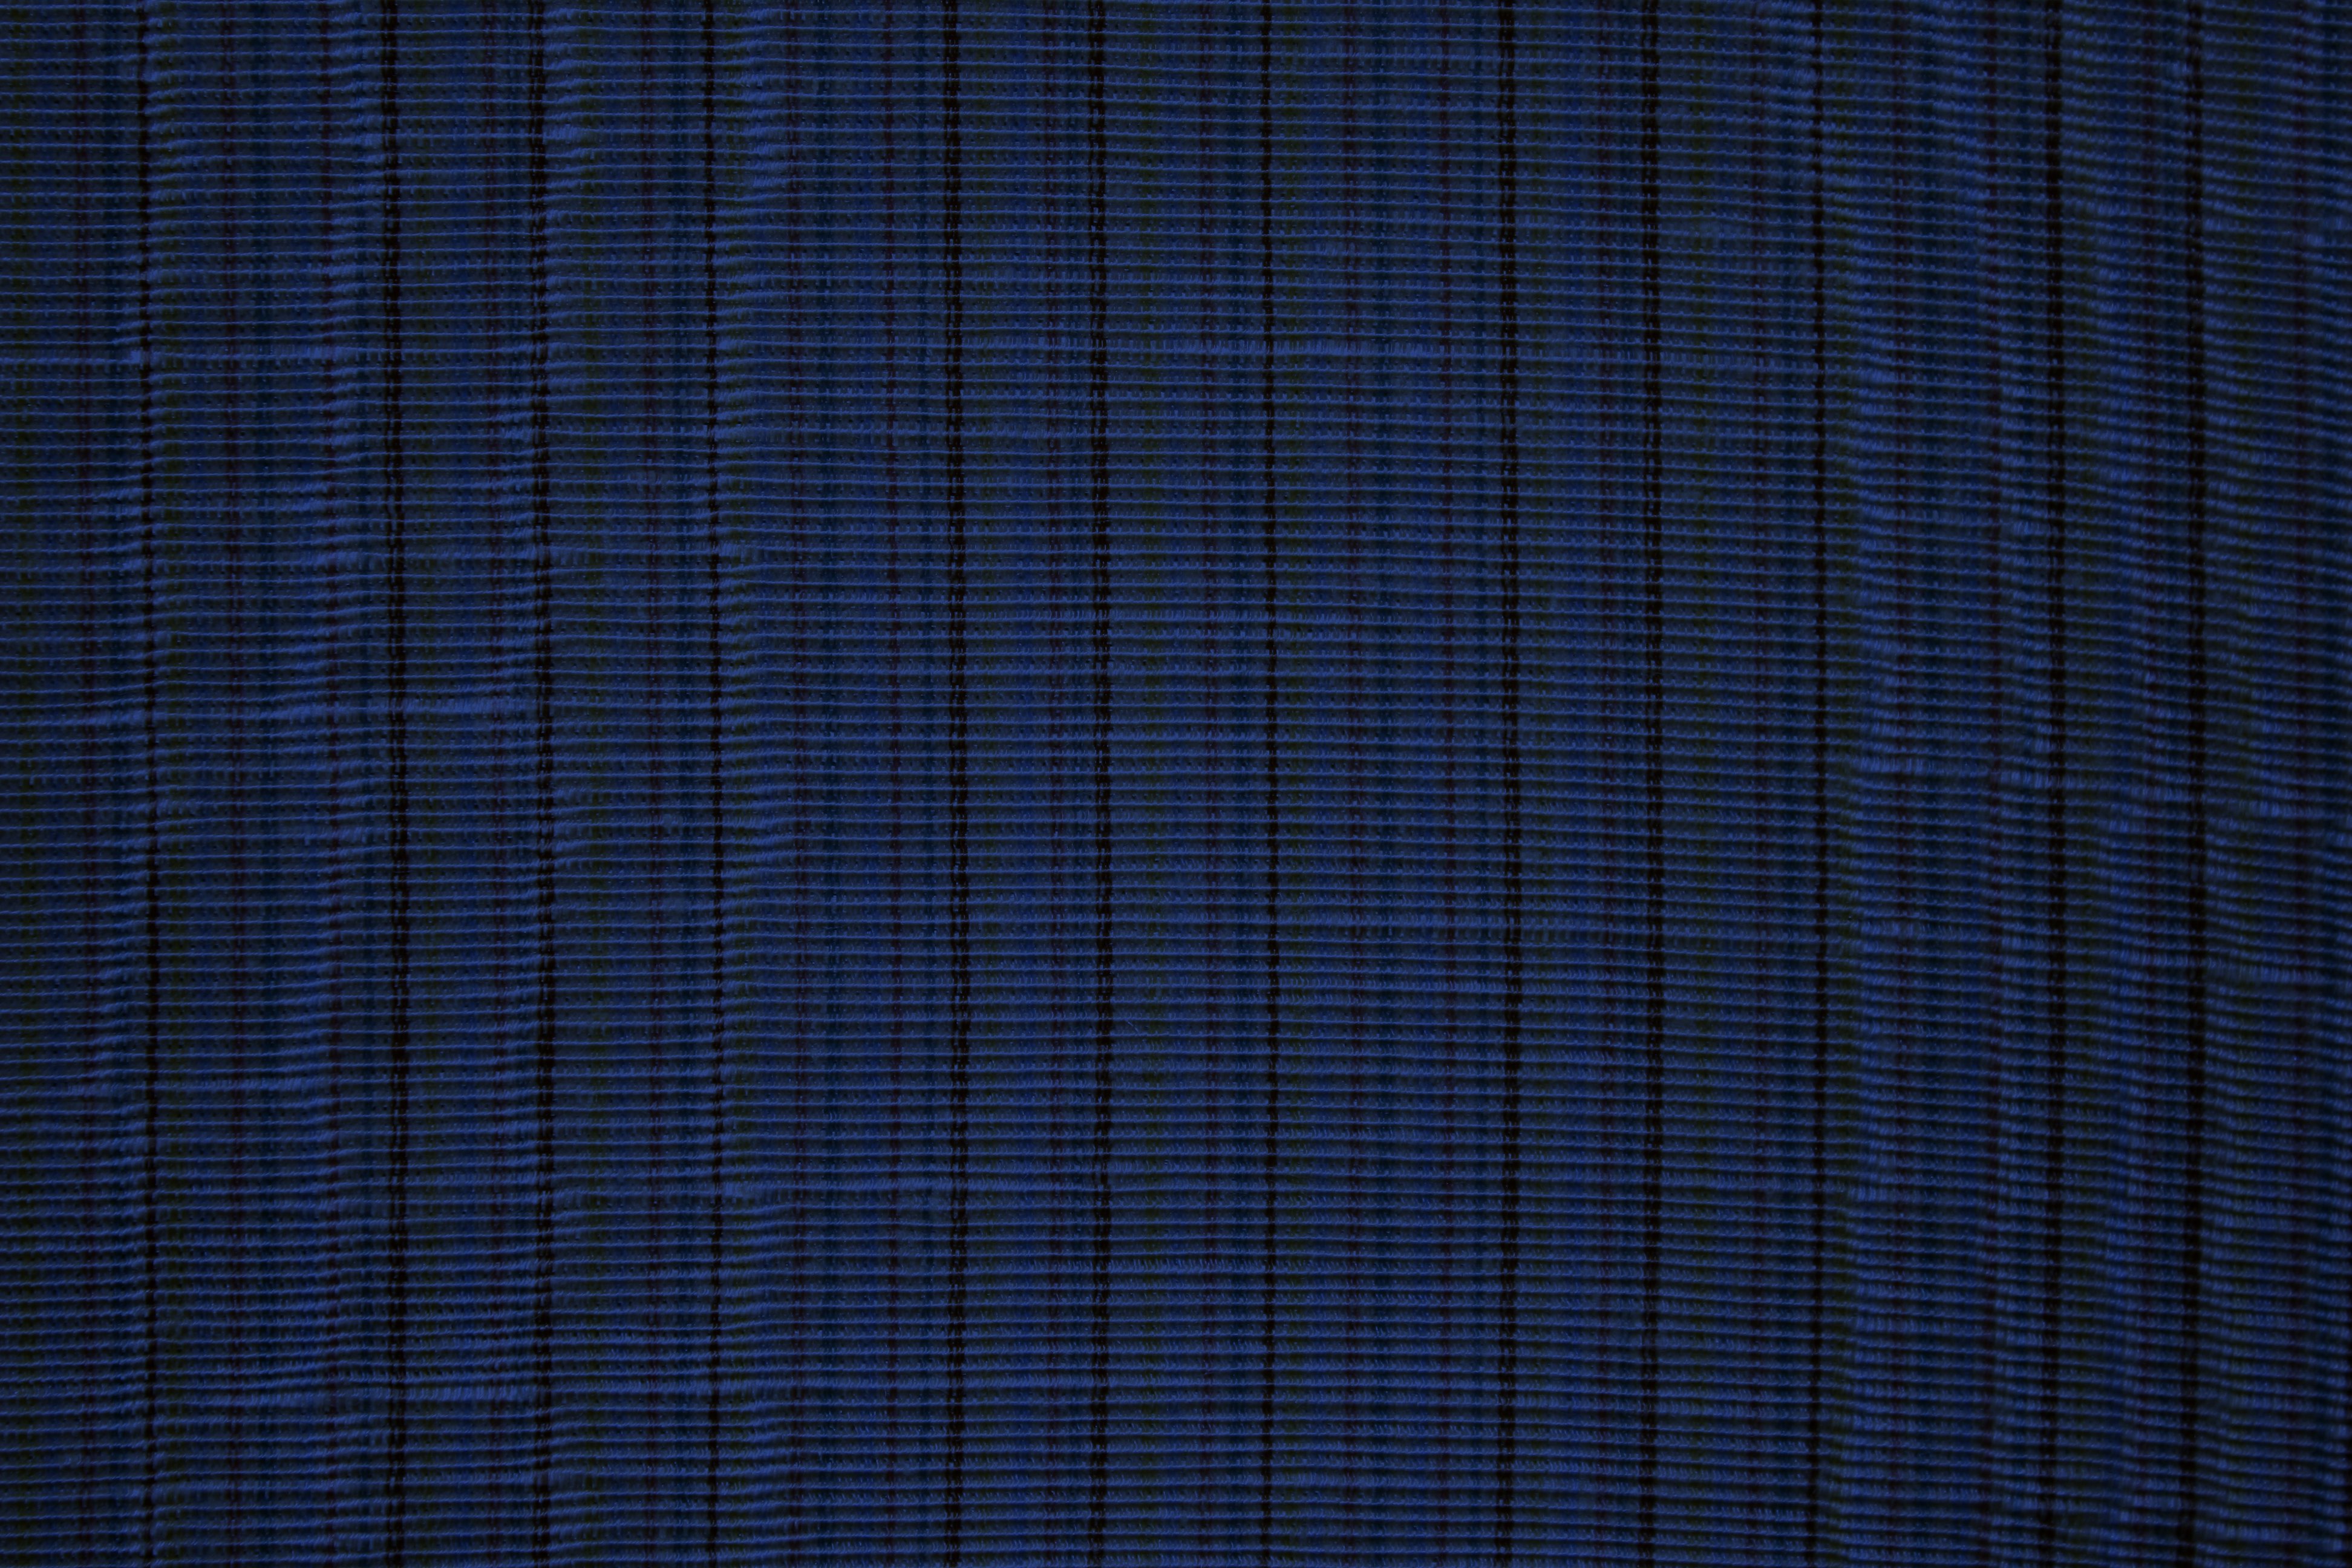 Navy Blue Upholstery Fabric Texture With Stripes Dimensions